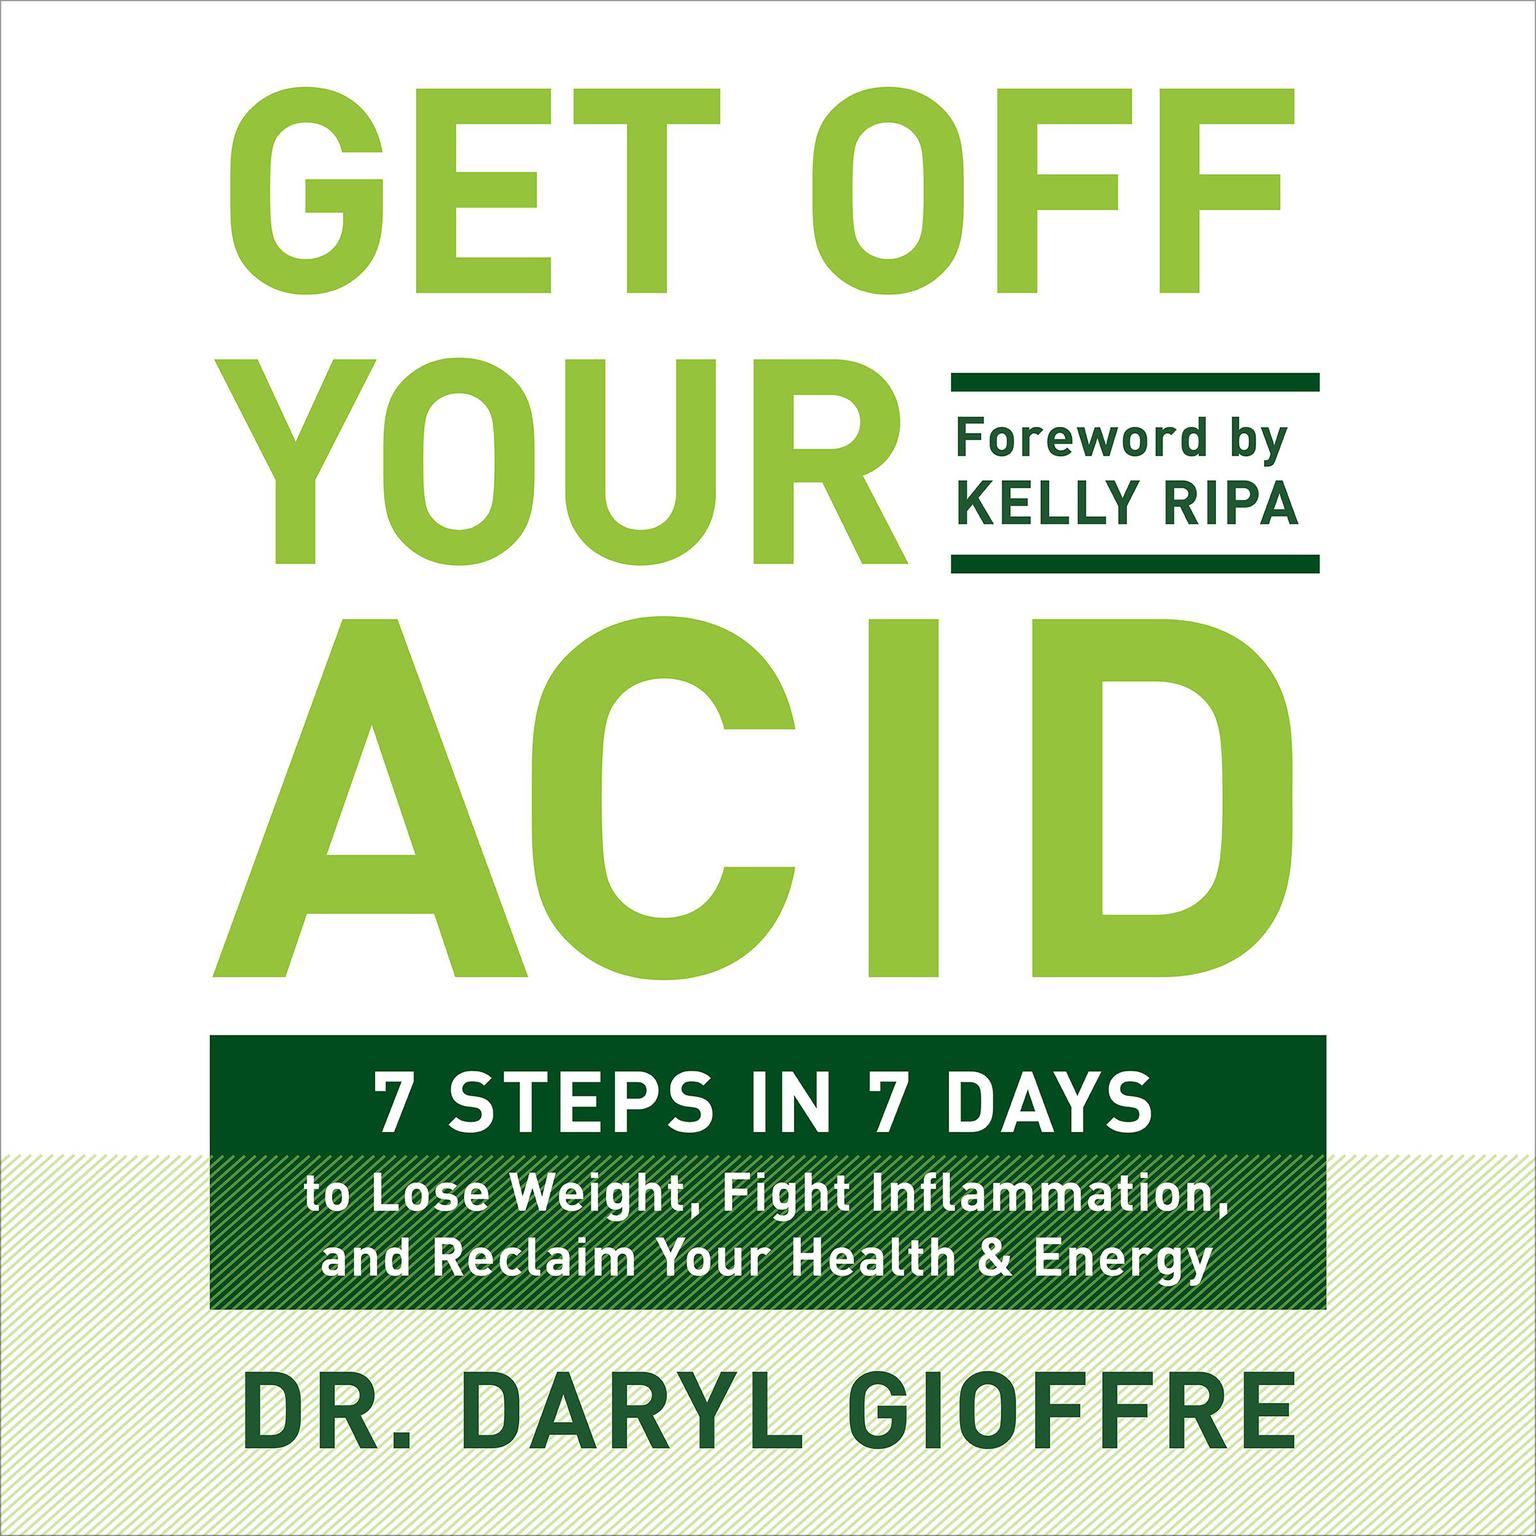 Get Off Your Acid: 7 Steps in 7 Days to Lose Weight, Fight Inflammation, and Reclaim Your Health and Energy Audiobook, by Daryl Gioffre